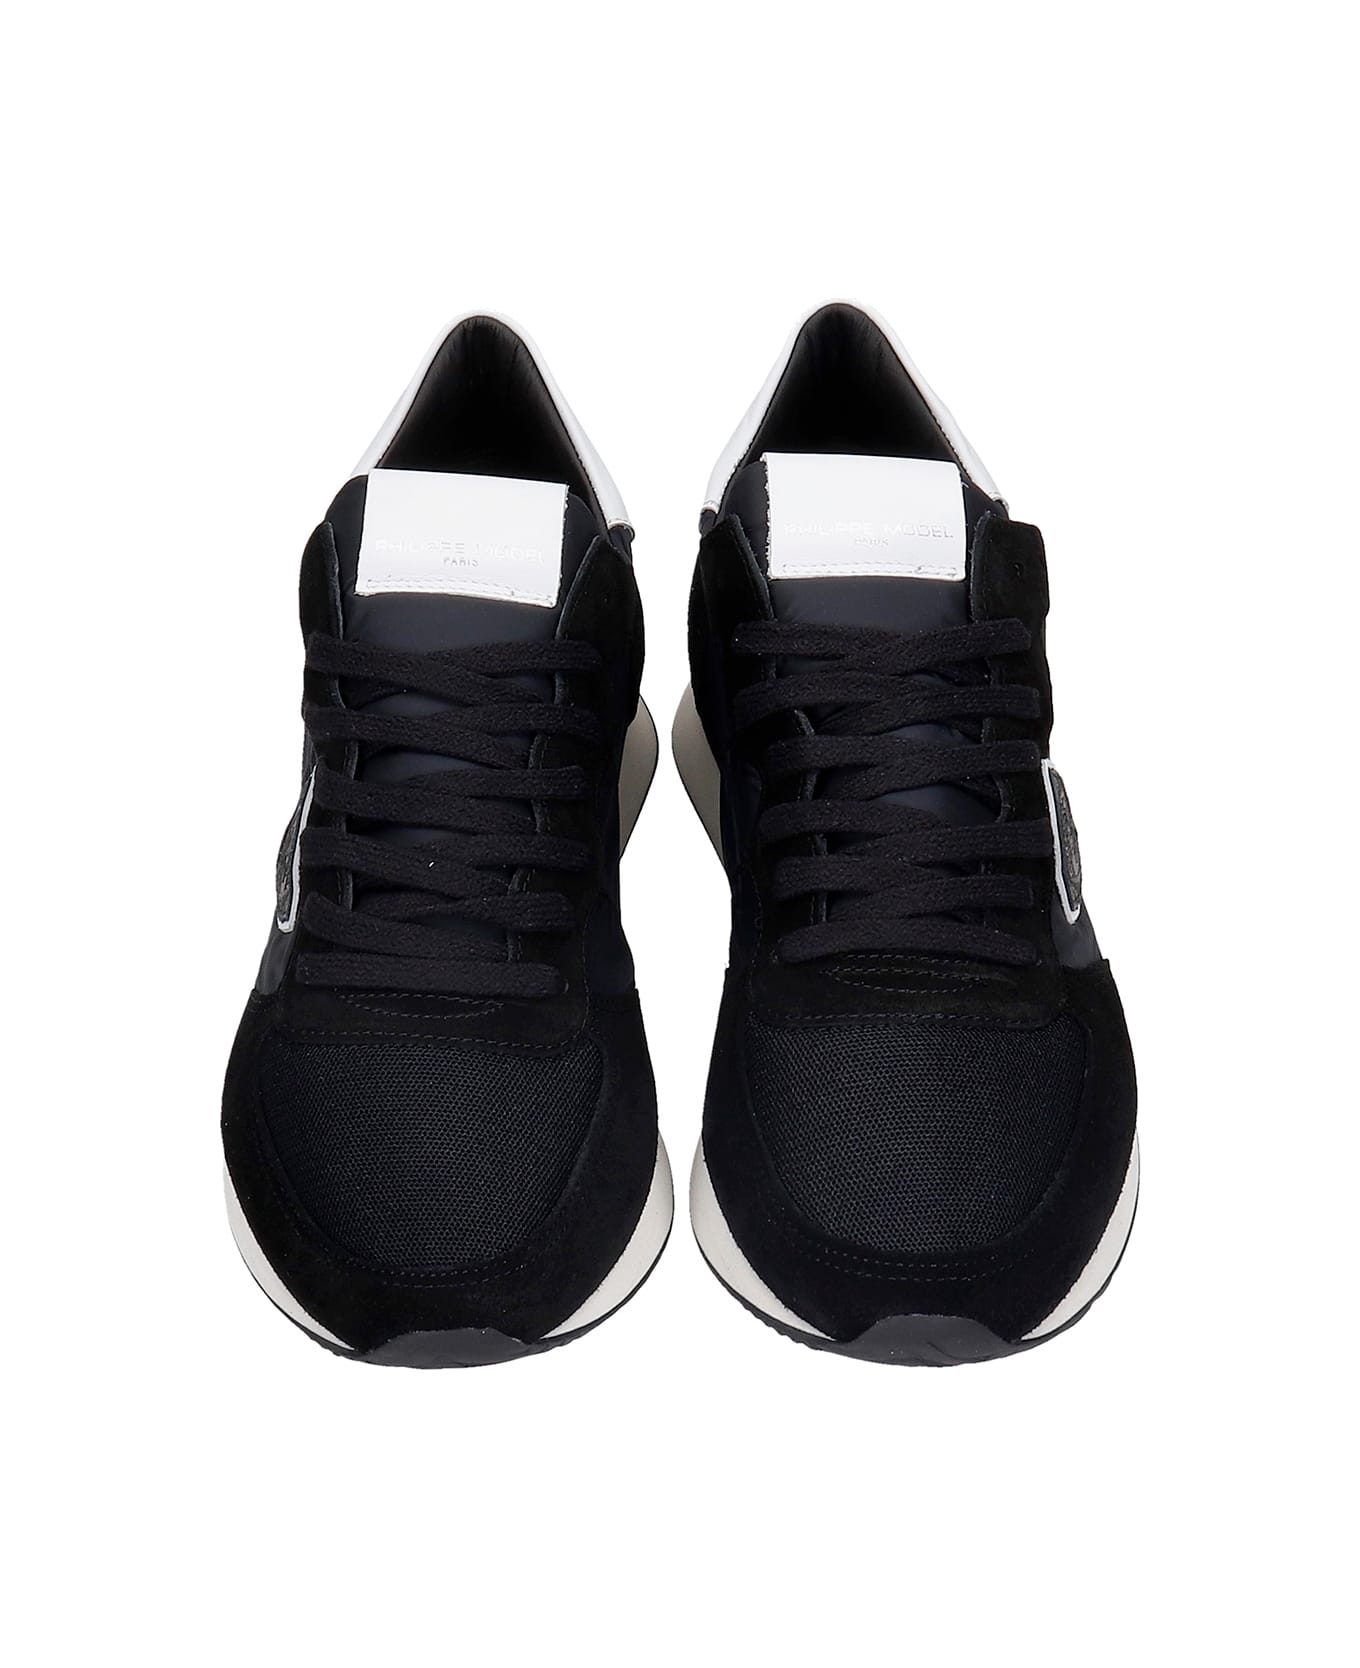 Philippe Model Trpx Sneakers In Black Suede And Fabric - BLACK